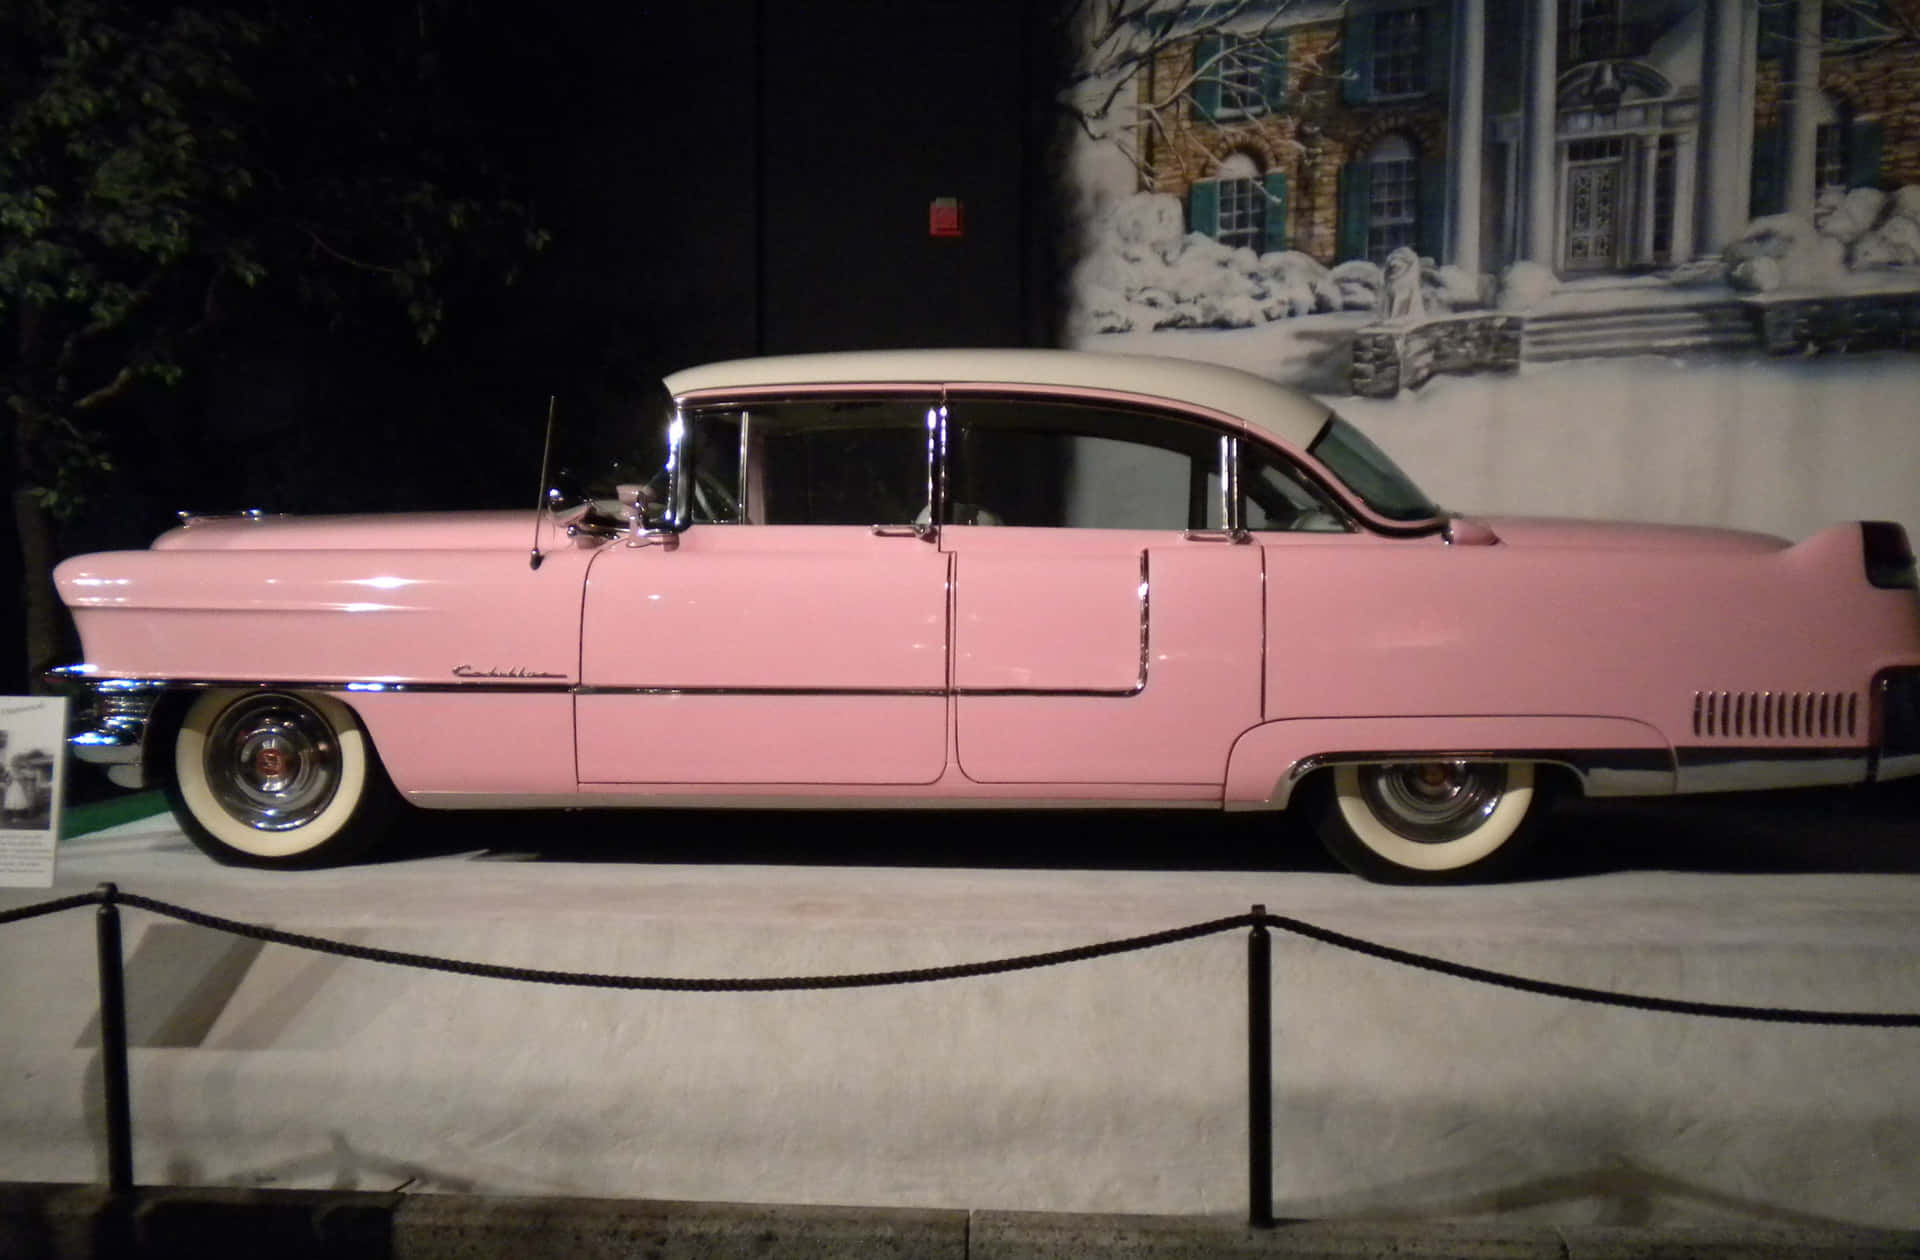 Stunning Pink Cadillac on the Road Wallpaper